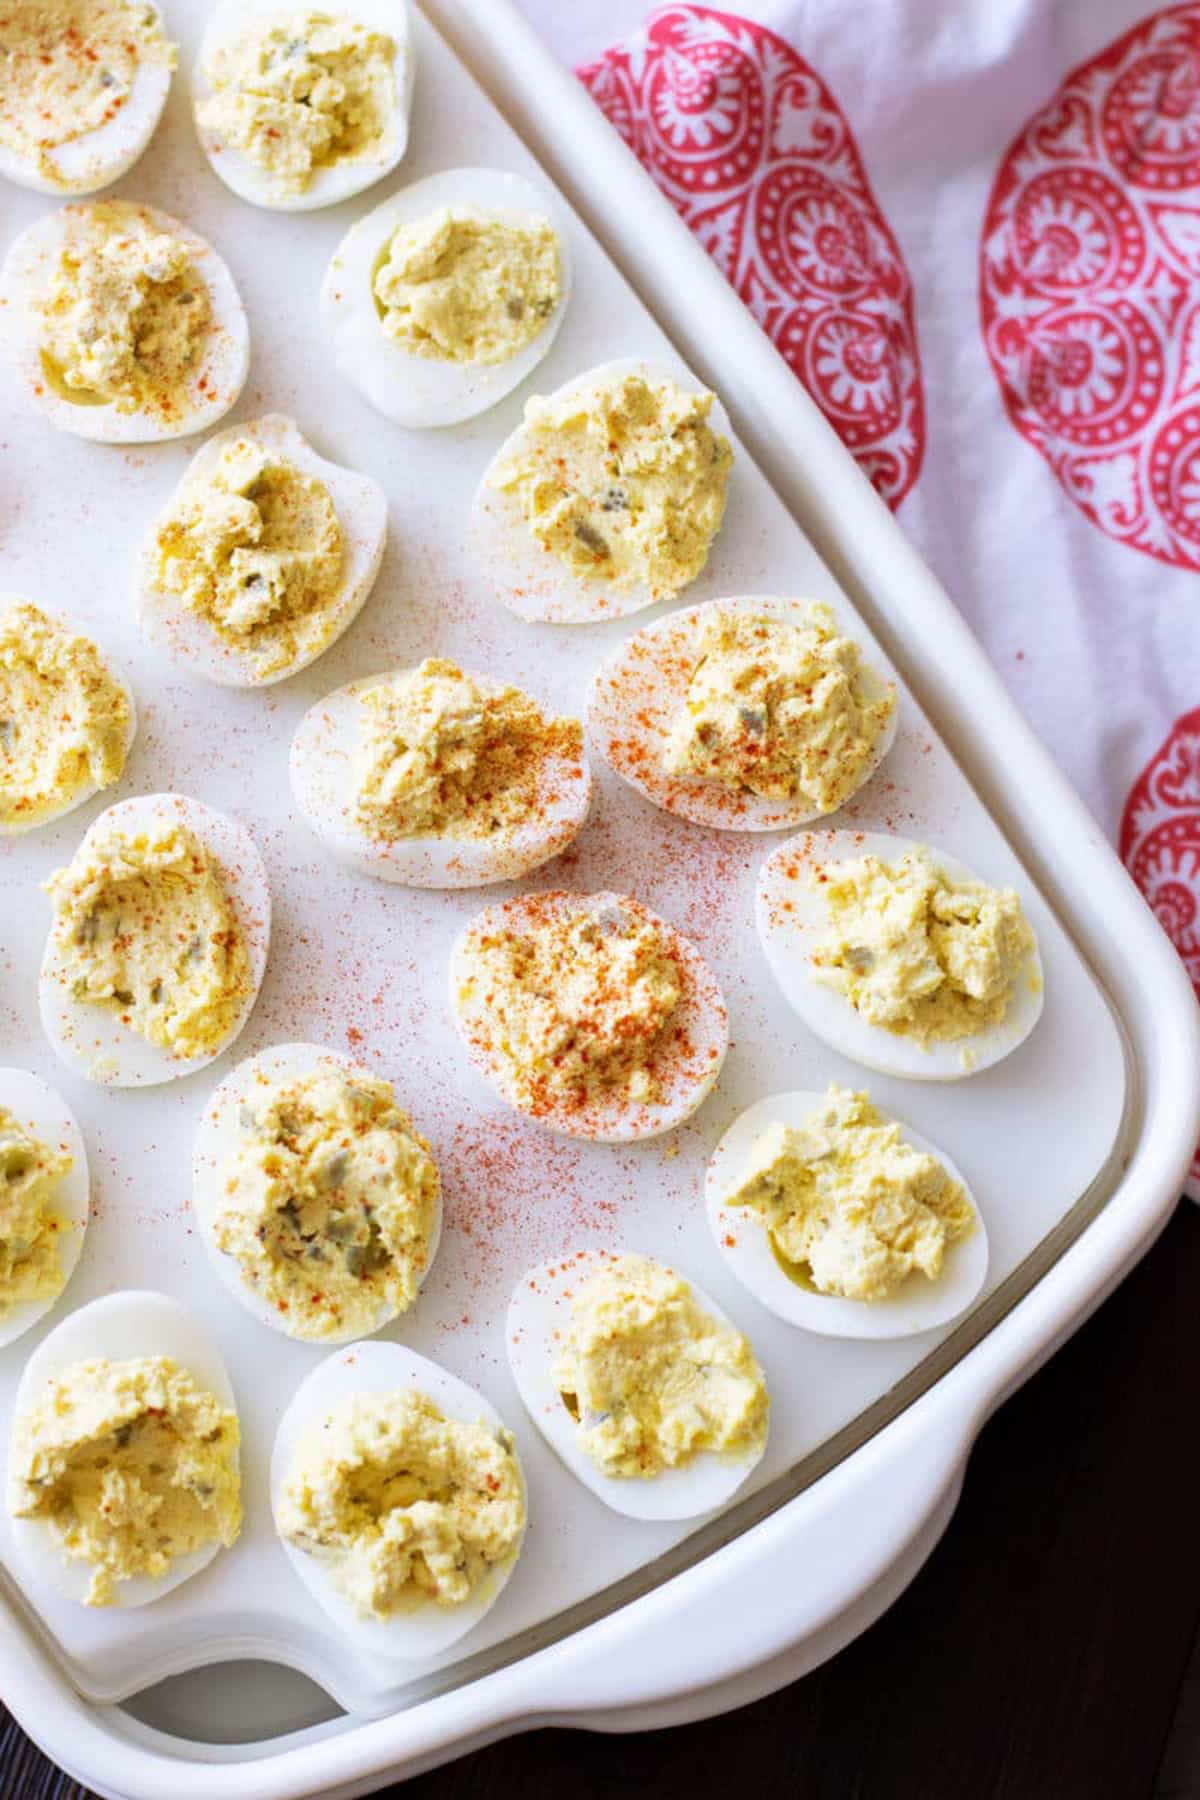 Platter containing 24 deviled eggs sopped with paprika. 